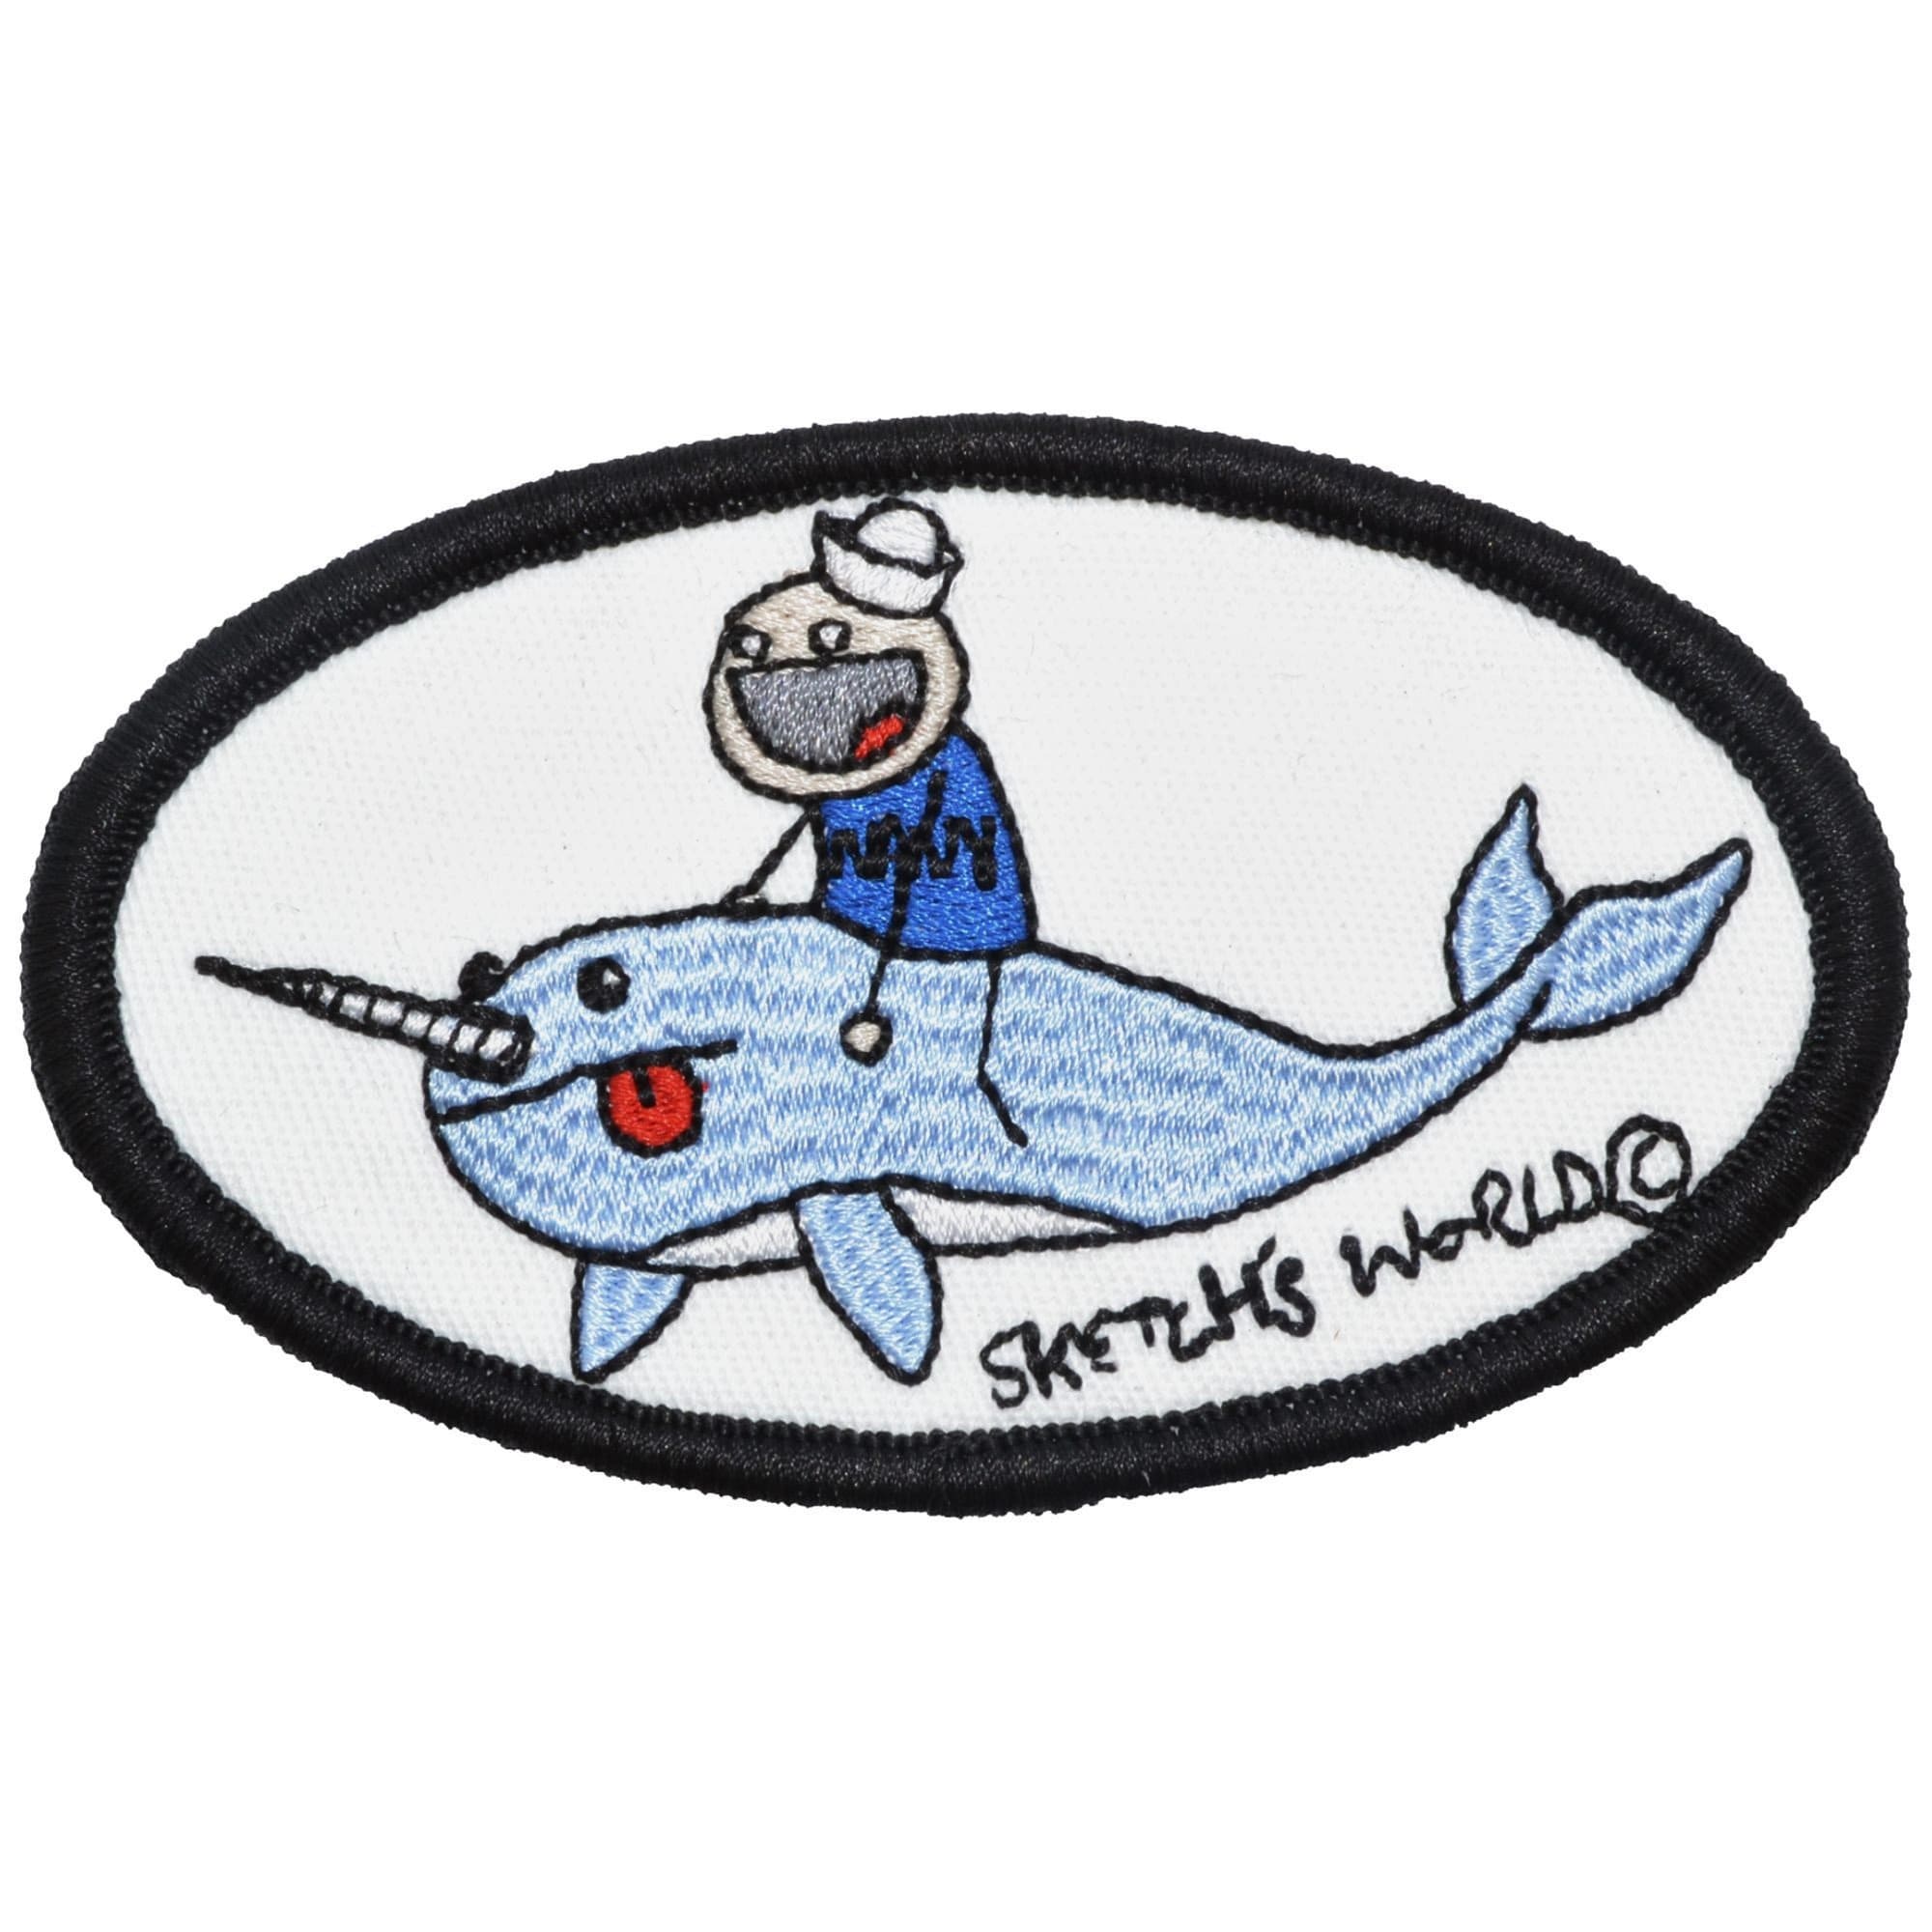 Tactical Gear Junkie Patches Sketch's World © US Navy Transport - 2.25x4 Patch